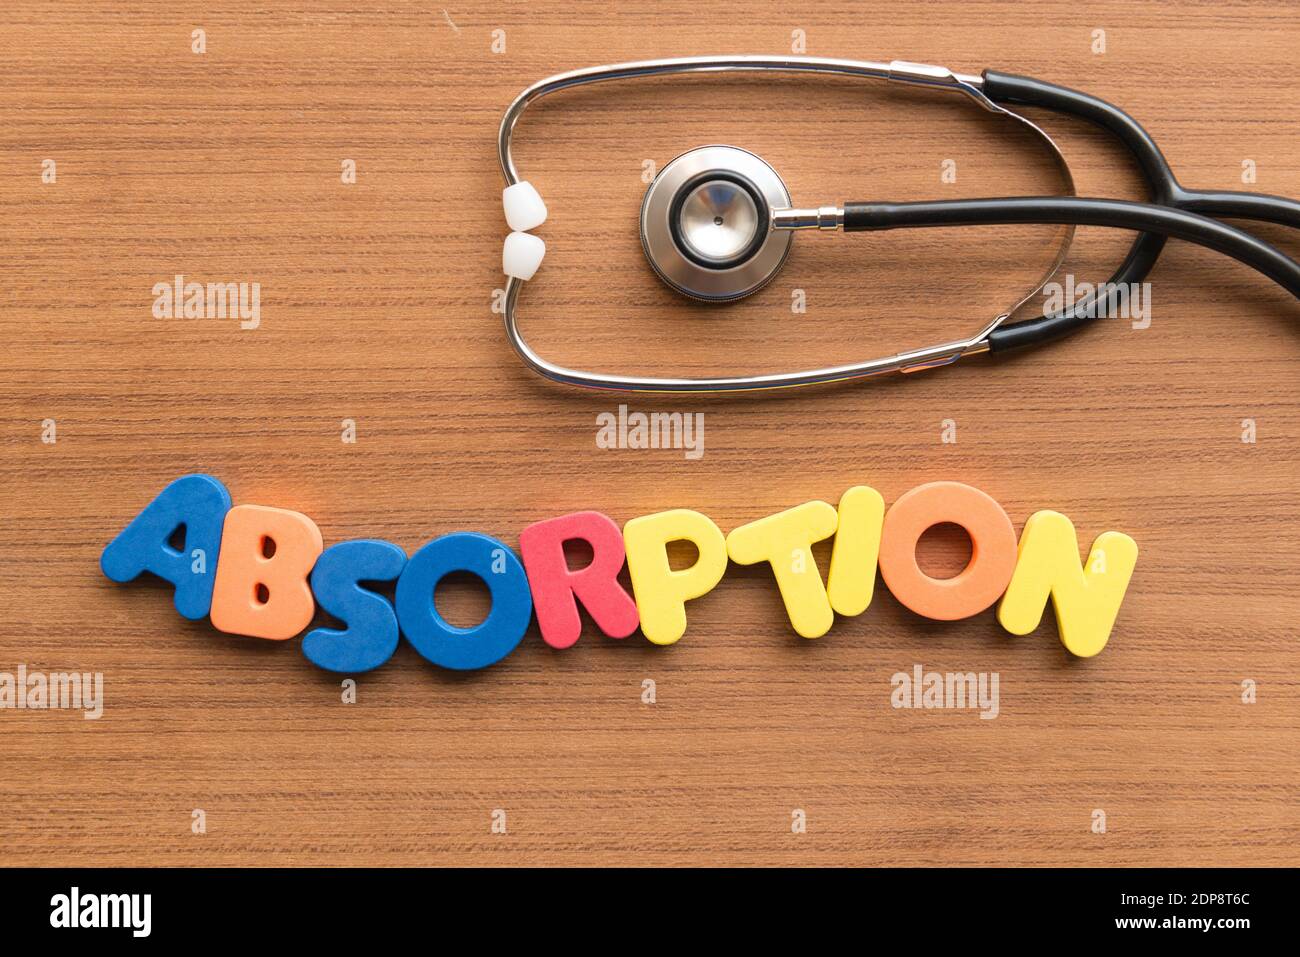 Directly Above Shot Of Stethoscope With Absorption Text On Wooden Table Stock Photo